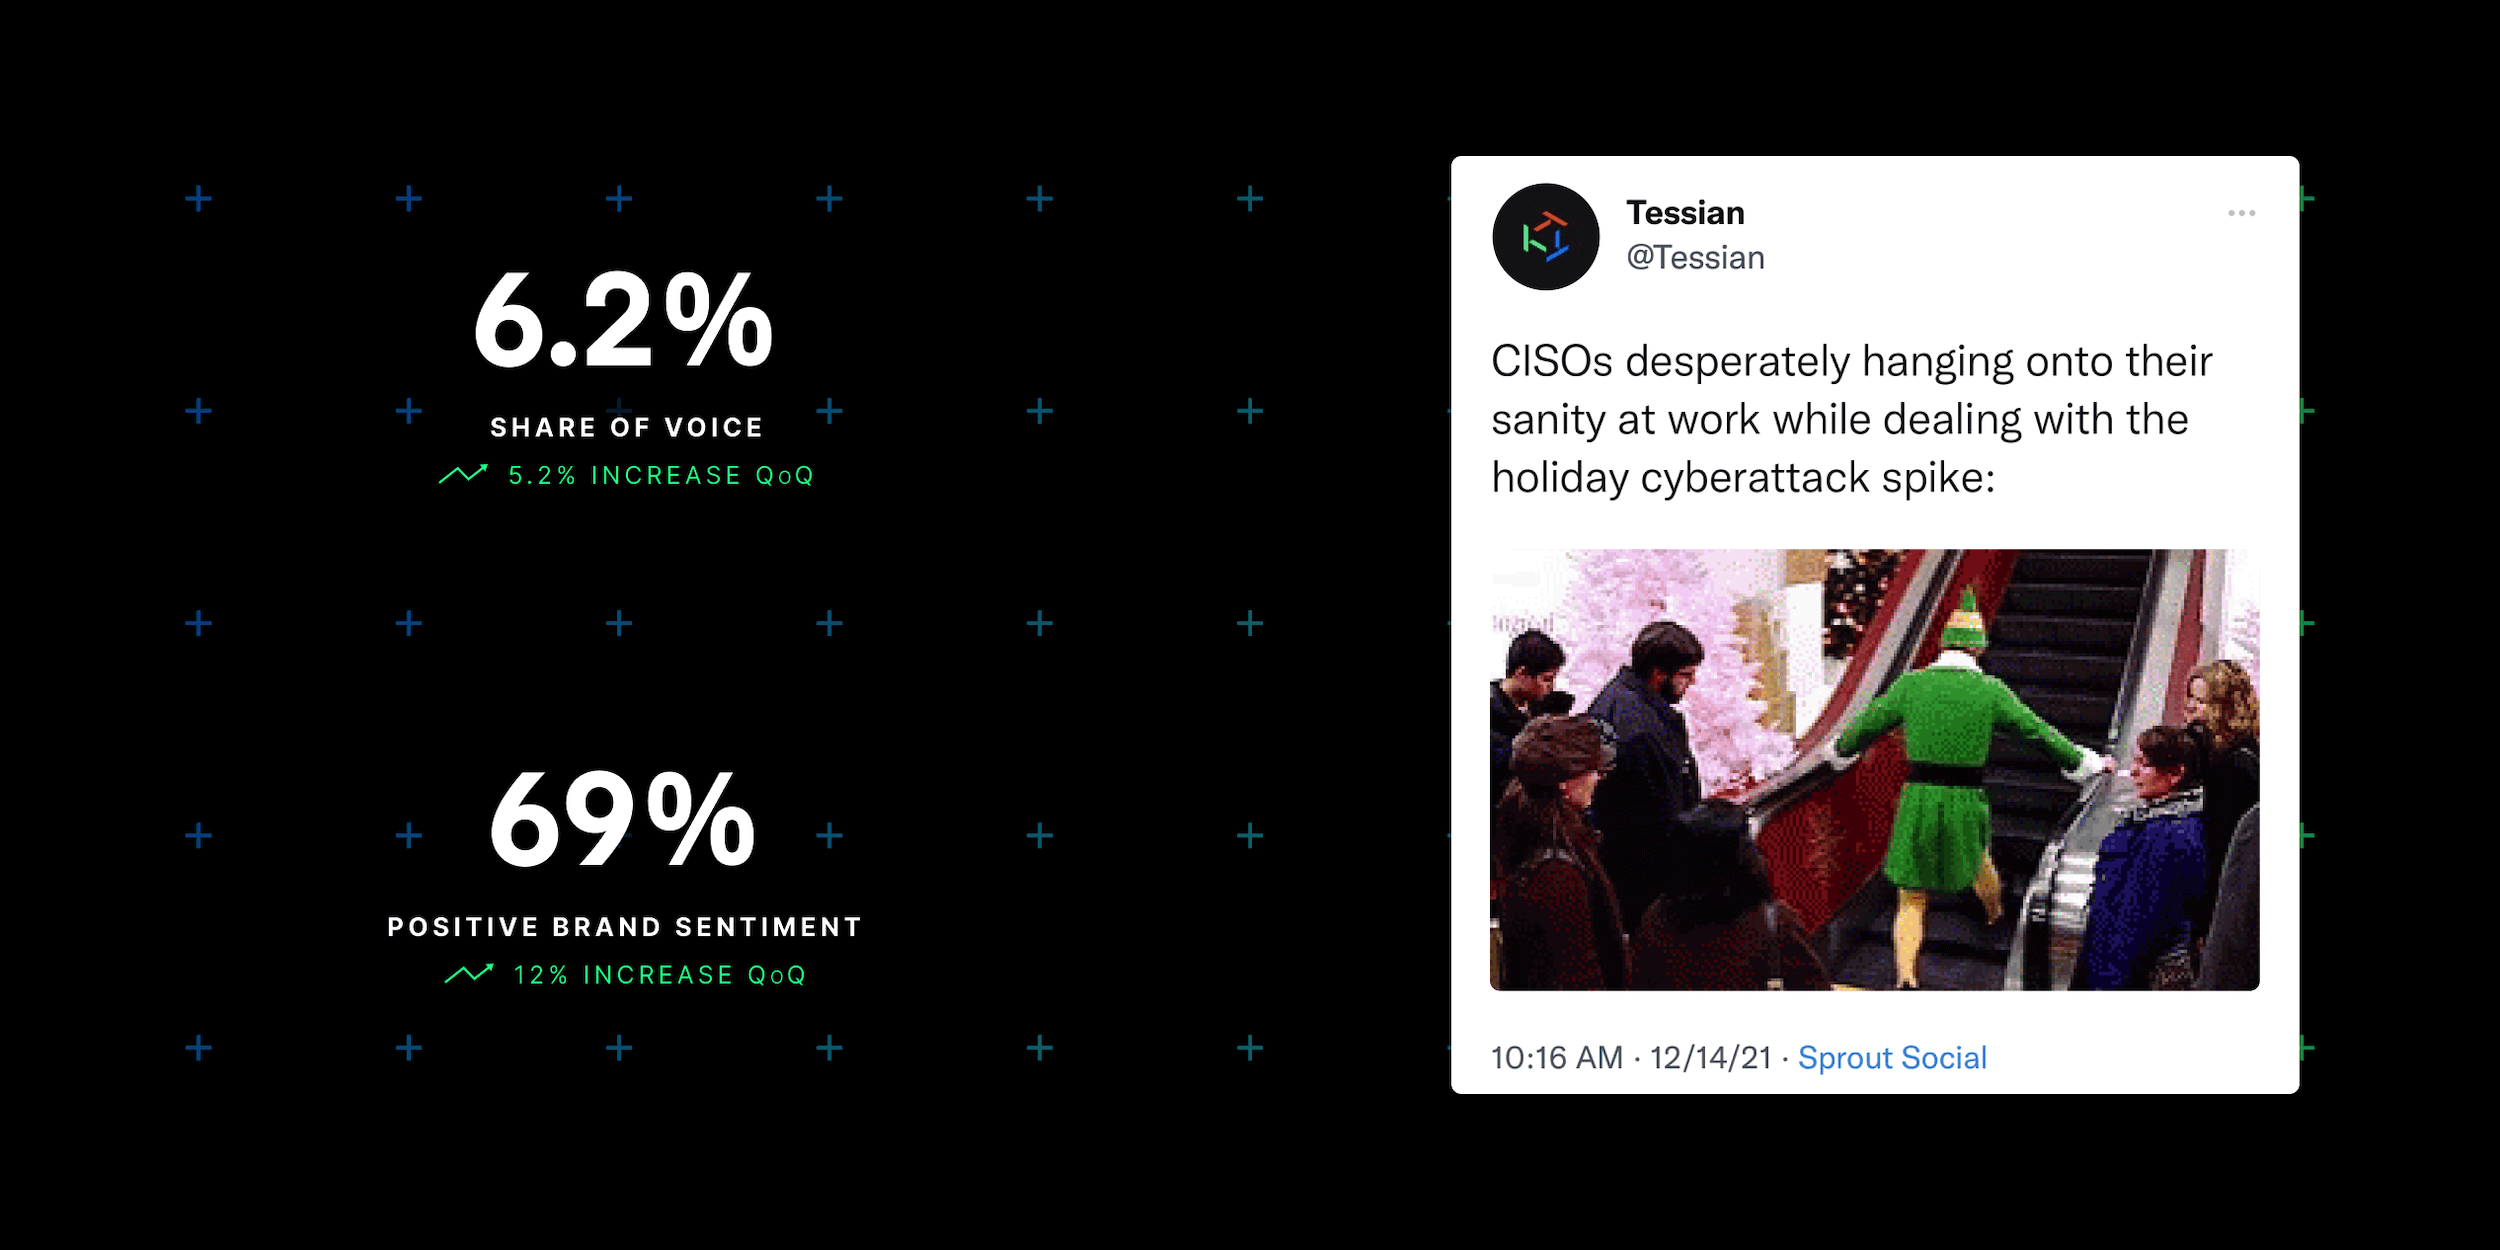 Mockup showing sample Tessian tweet with 6.2% share of voice and 69% positive brand sentiment